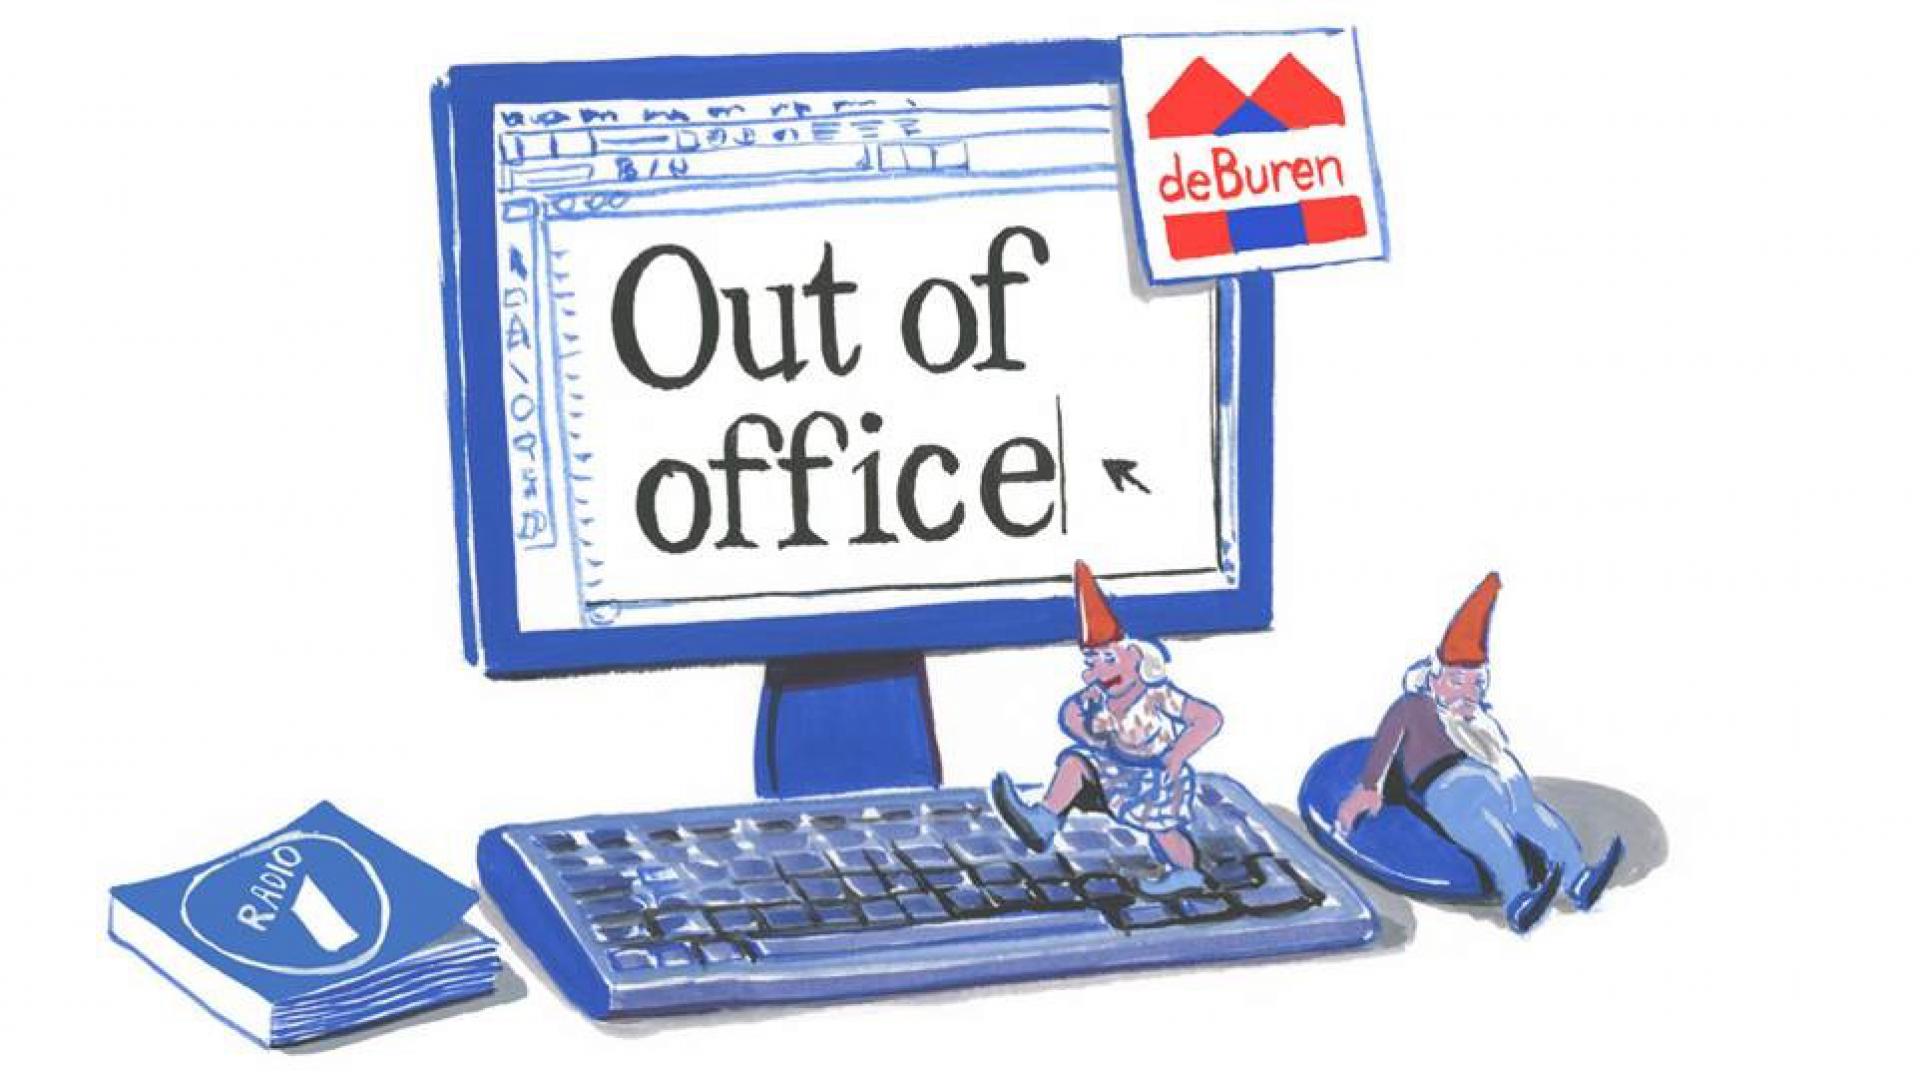 Out of office Radio 1